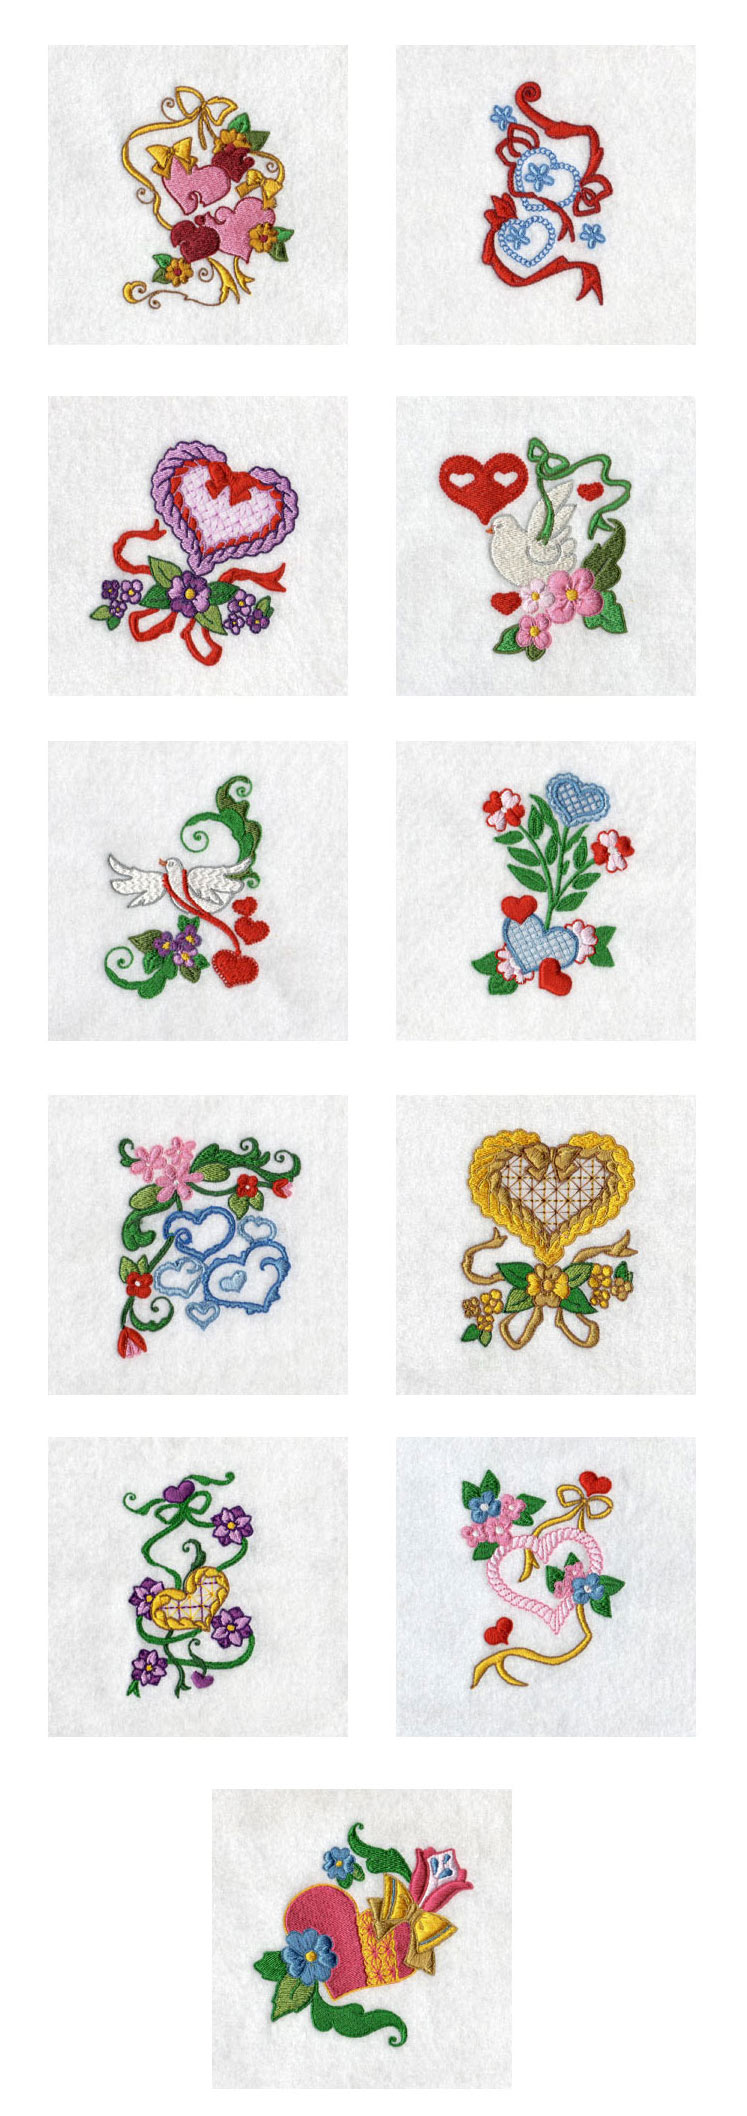 Hearts and Ribbons Embroidery Machine Design Details